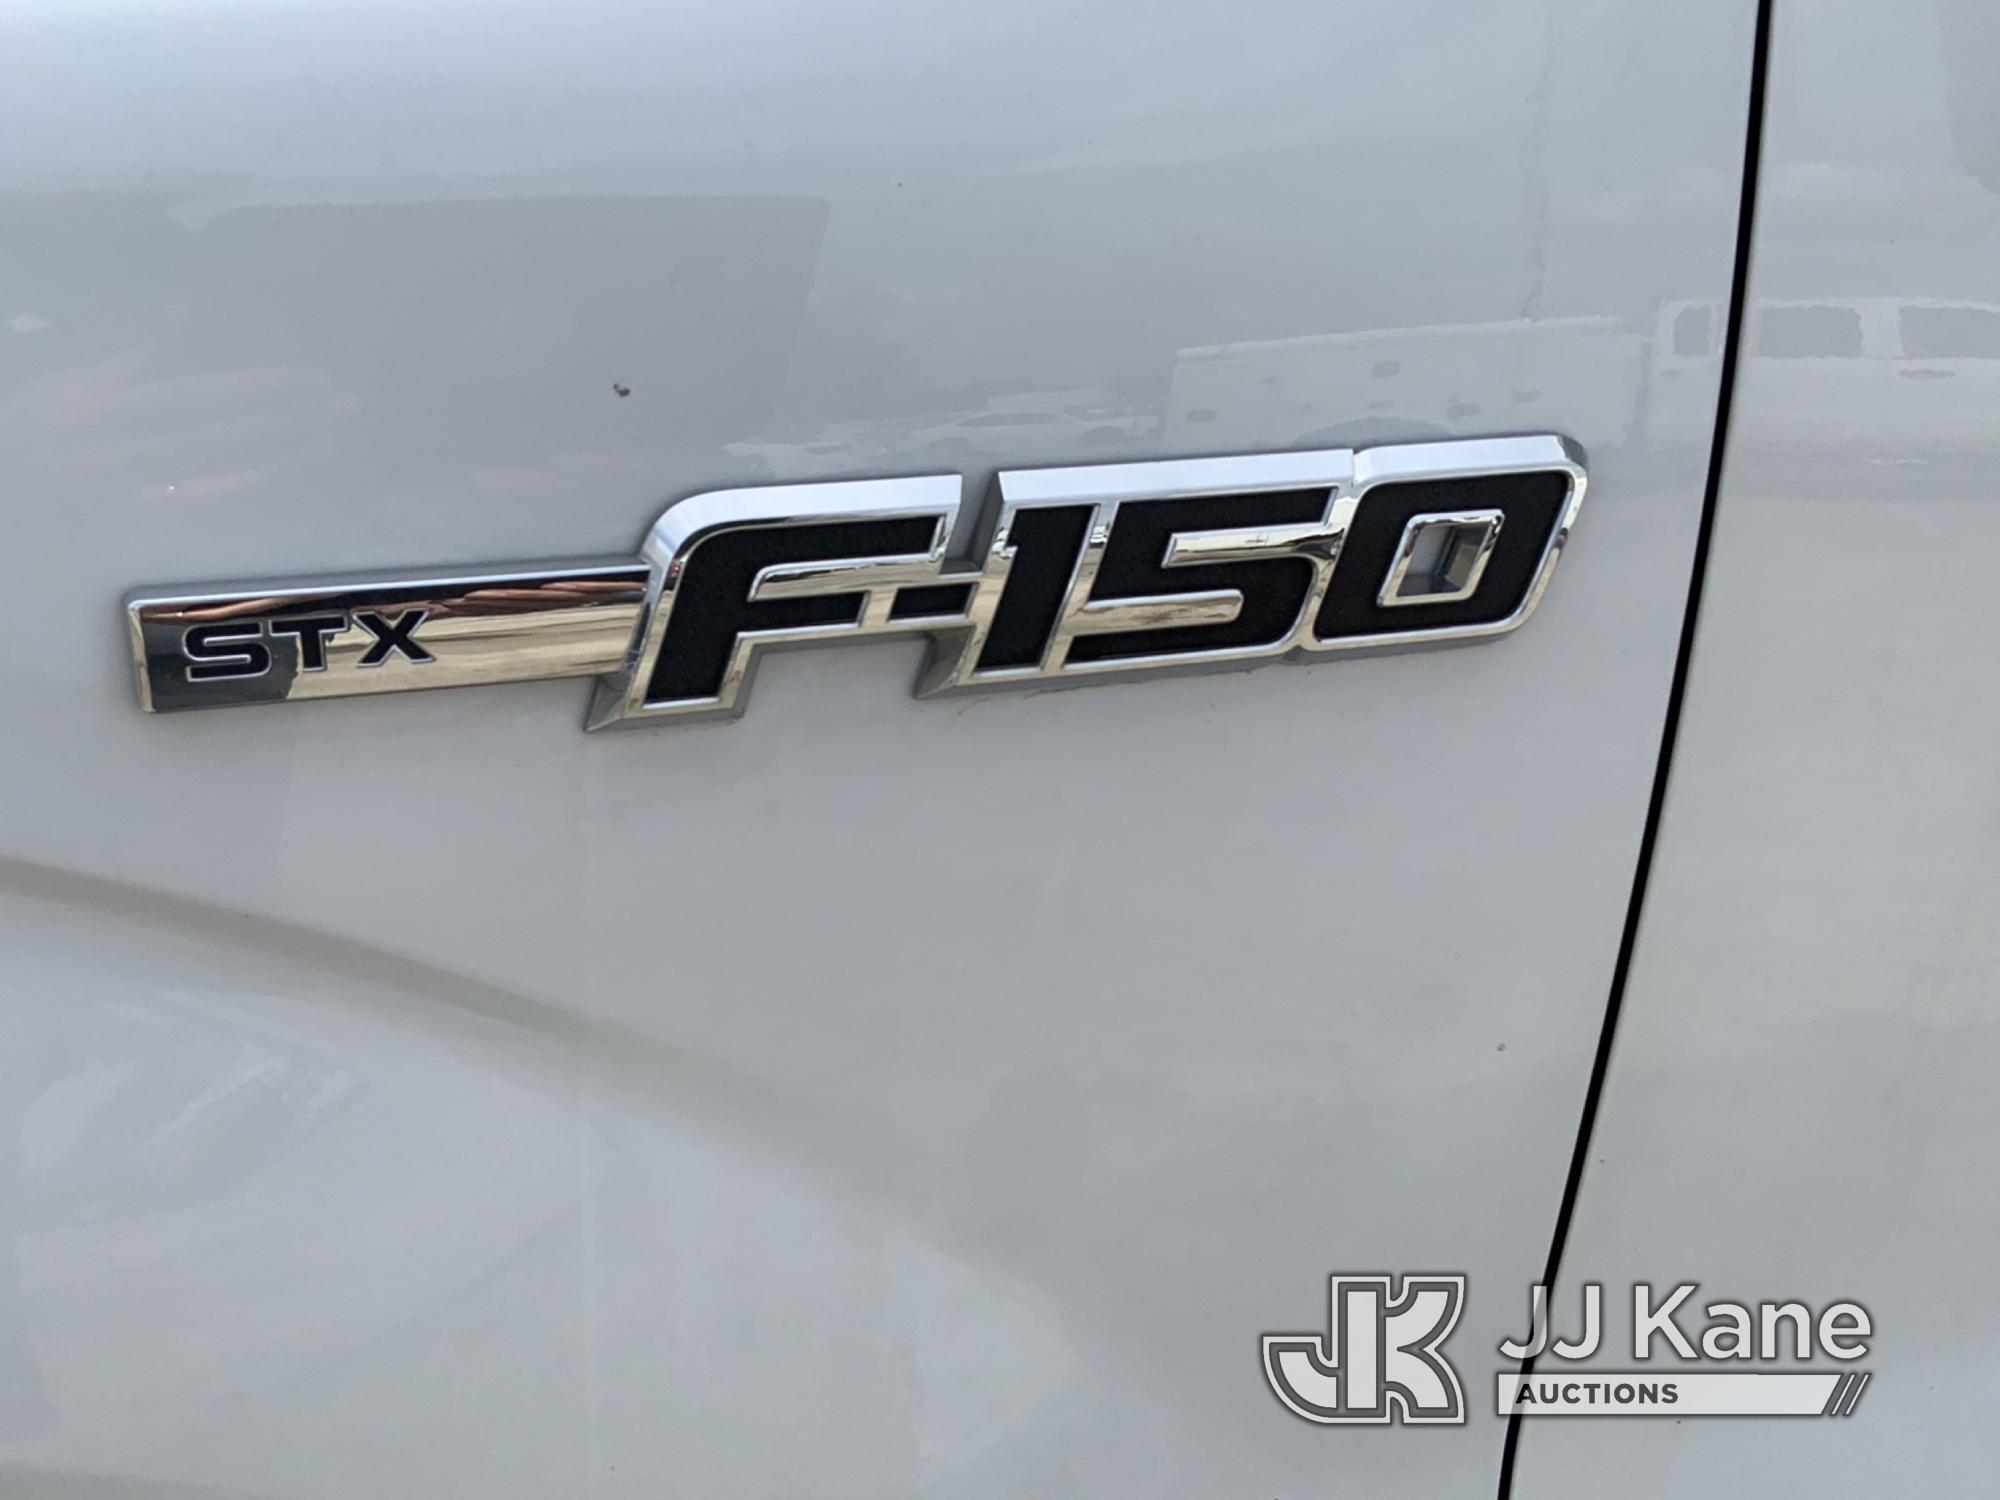 (South Beloit, IL) 2014 Ford F150 4x4 Extended-Cab Pickup Truck Runs, Moves, Rust Damage